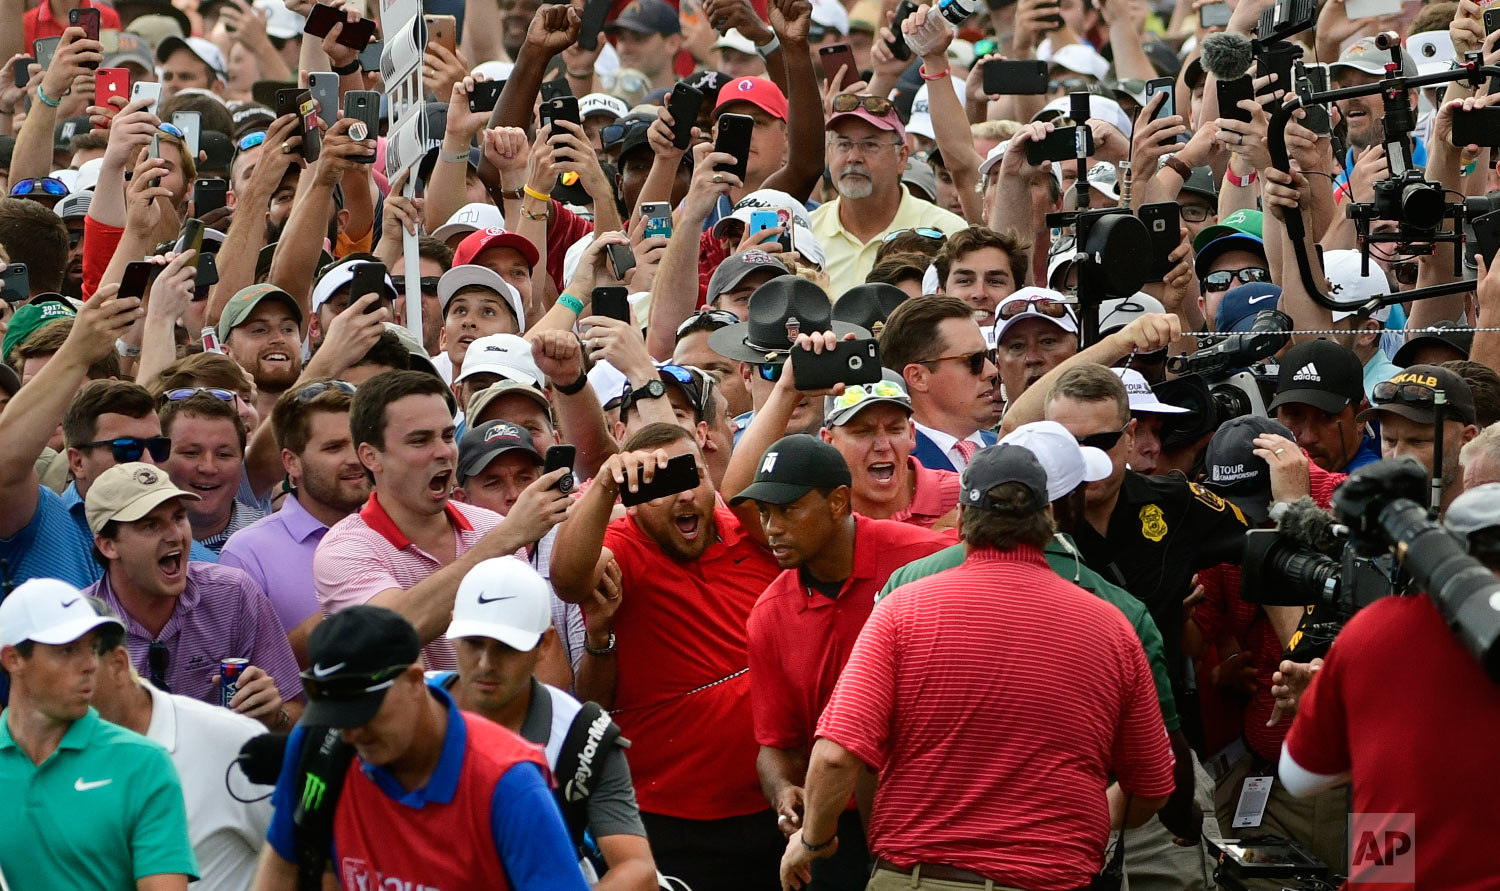  Tiger Woods, lower center, and Rory McIlroy, lower left, emerge from a horde of fans following Tiger on their way to the 18th green during the final round of the Tour Championship golf tournament in Atlanta on Sept. 23, 2018. (AP Photo/John Amis) 